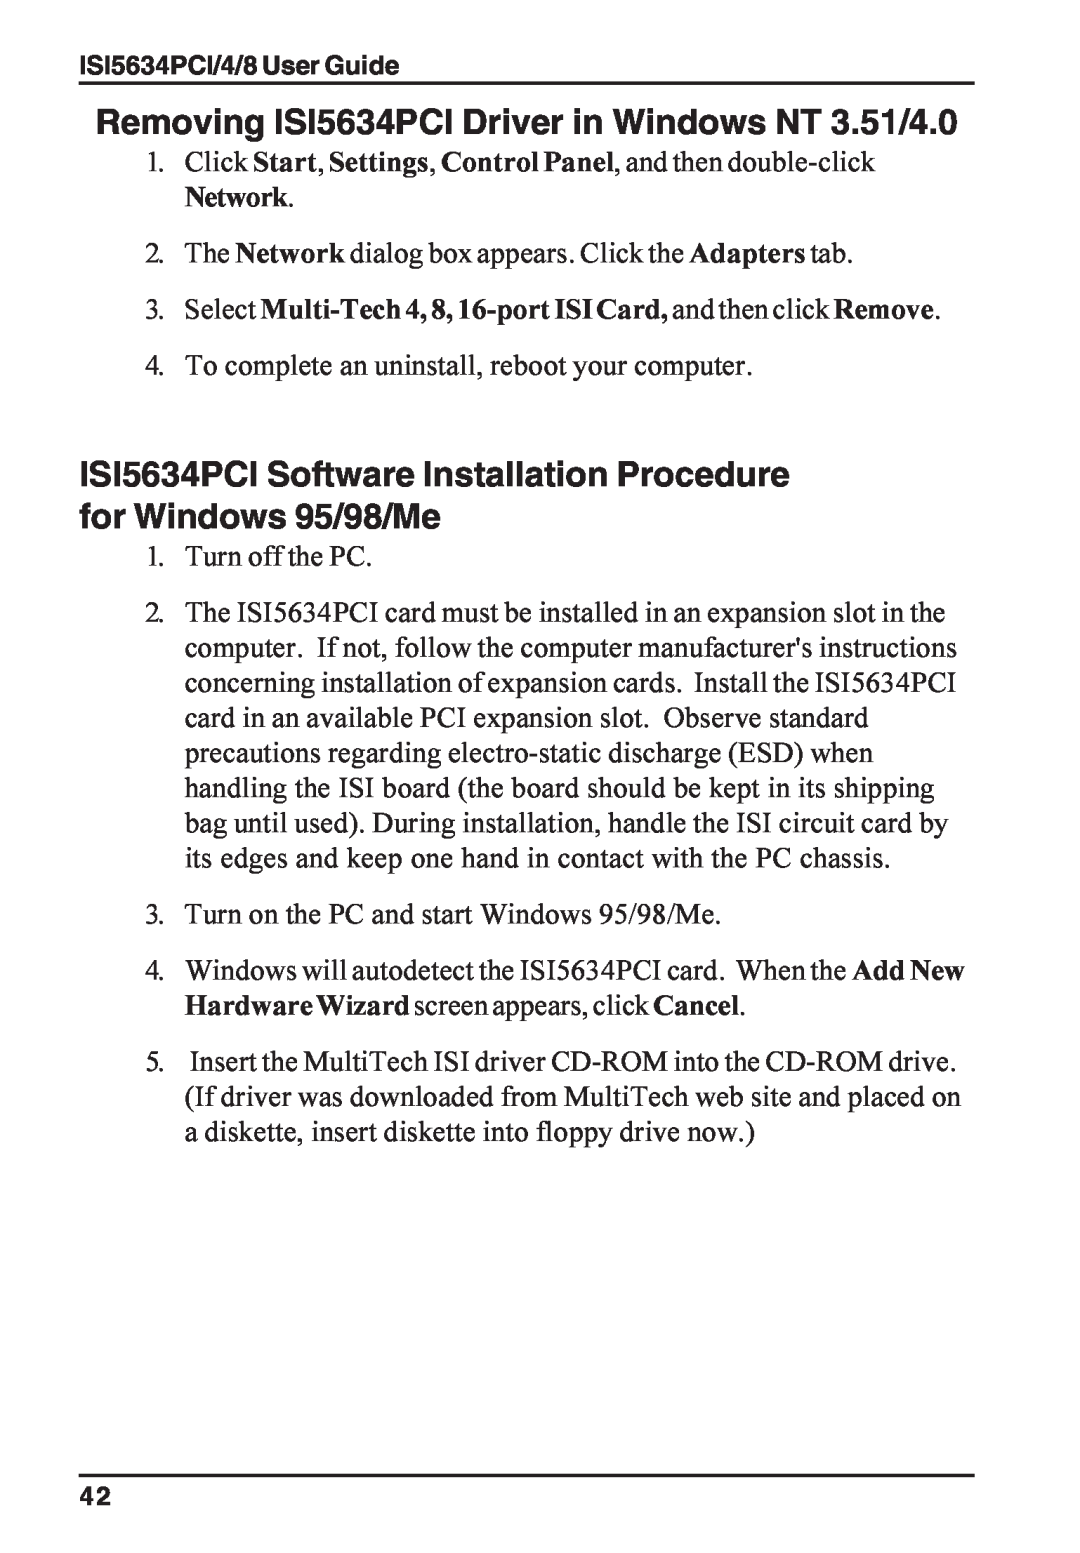 Multi-Tech Systems ISI5634PCI/4/8 manual Removing ISI5634PCI Driver in Windows NT 3.51/4.0 